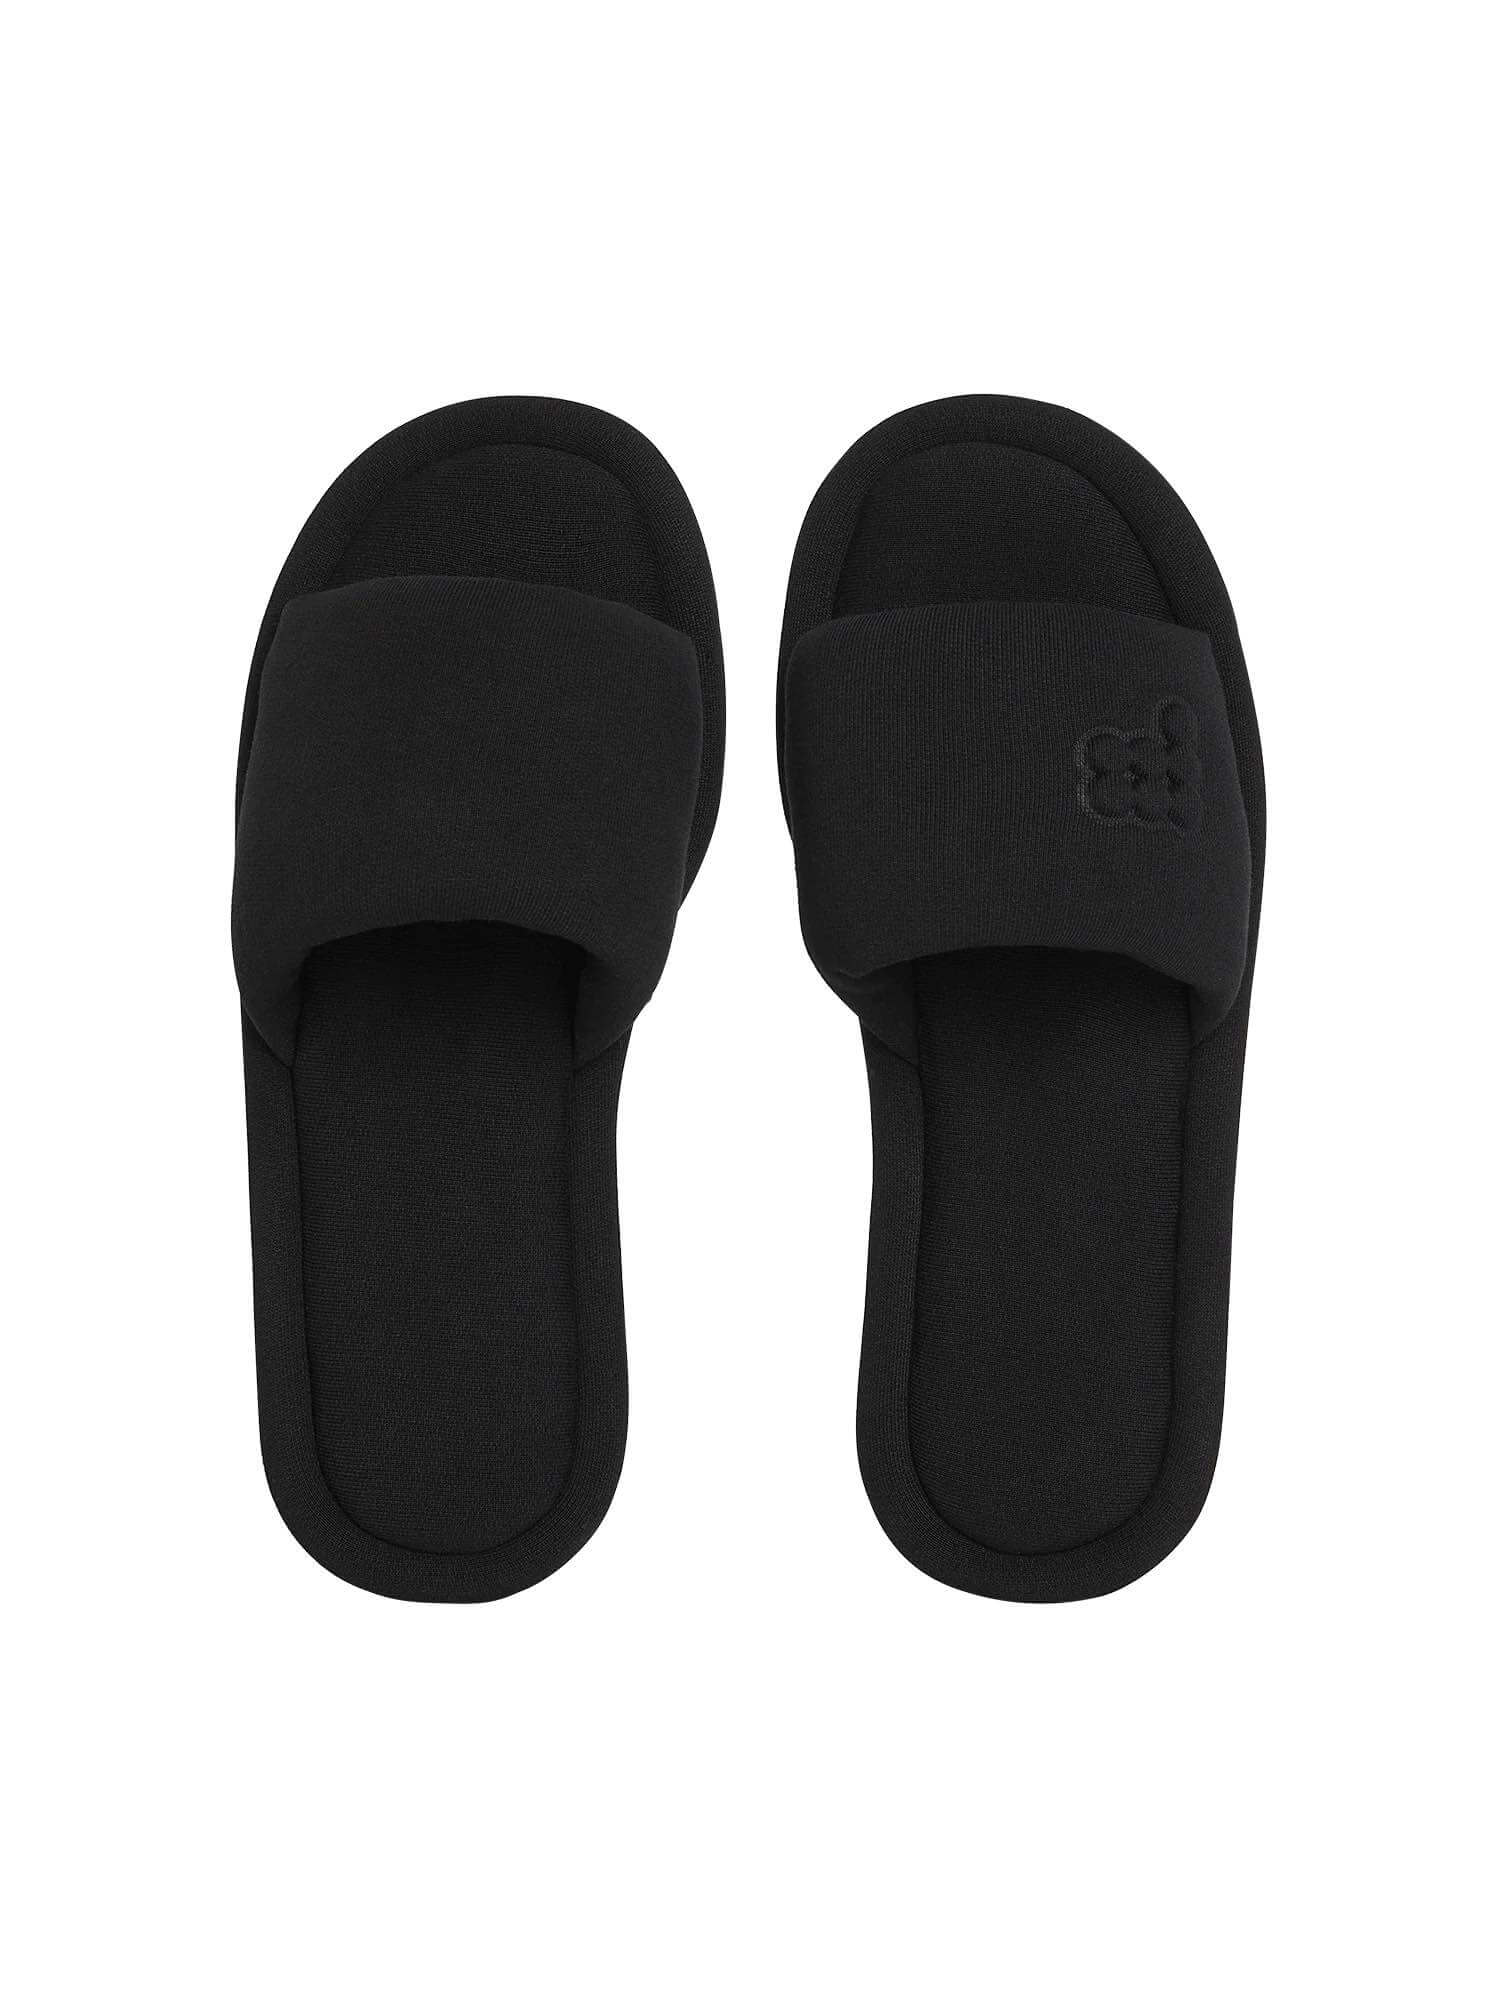 sustainable house slippers slider by Pangaia